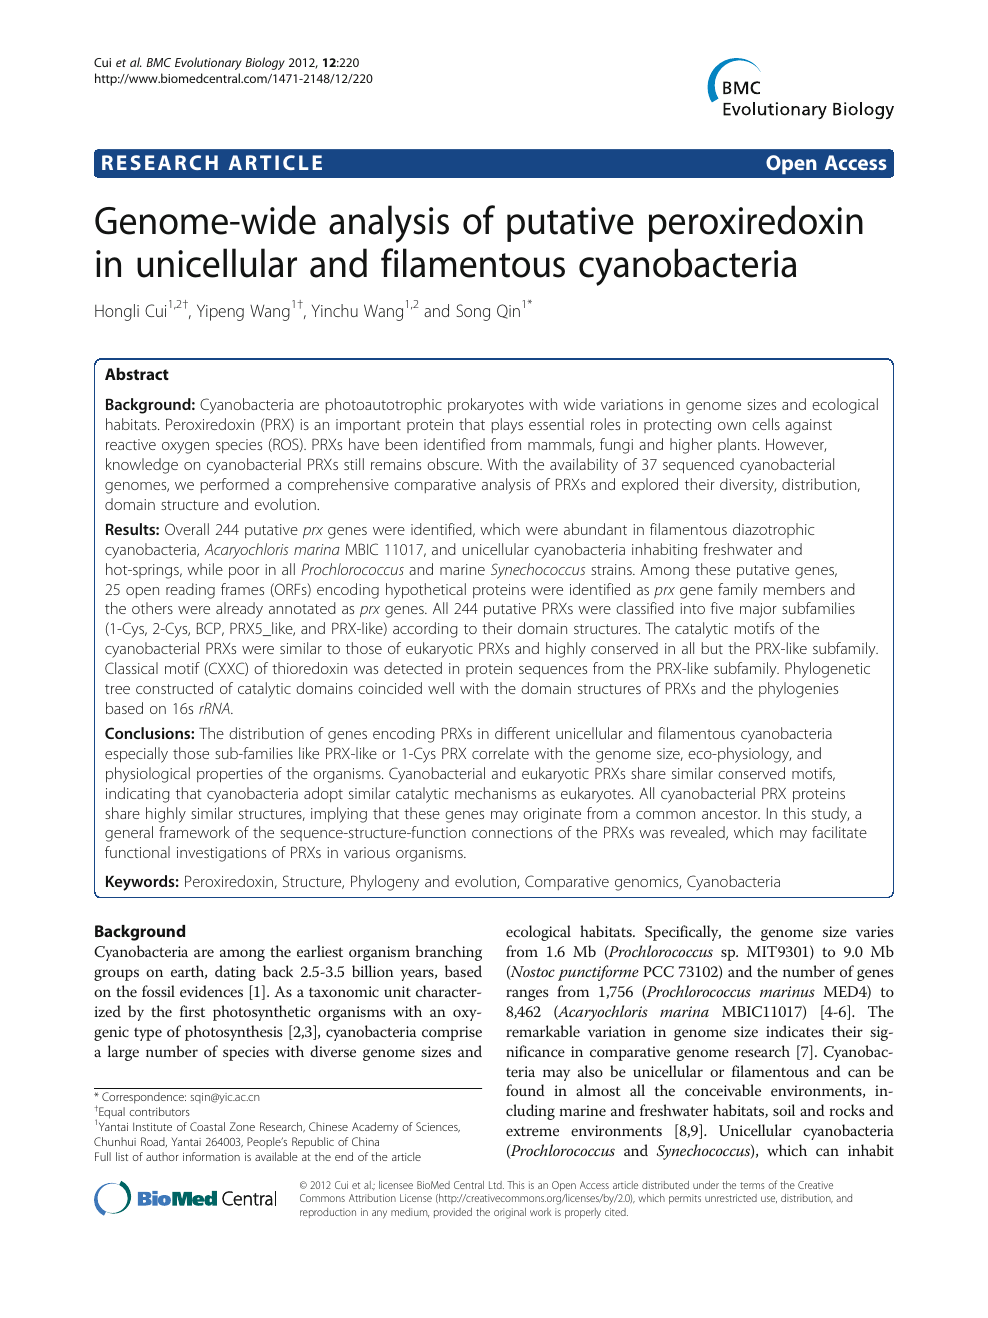 Genome Wide Analysis Of Putative Peroxiredoxin In Unicellular And Filamentous Cyanobacteria Topic Of Research Paper In Biological Sciences Download Scholarly Article Pdf And Read For Free On Cyberleninka Open Science Hub